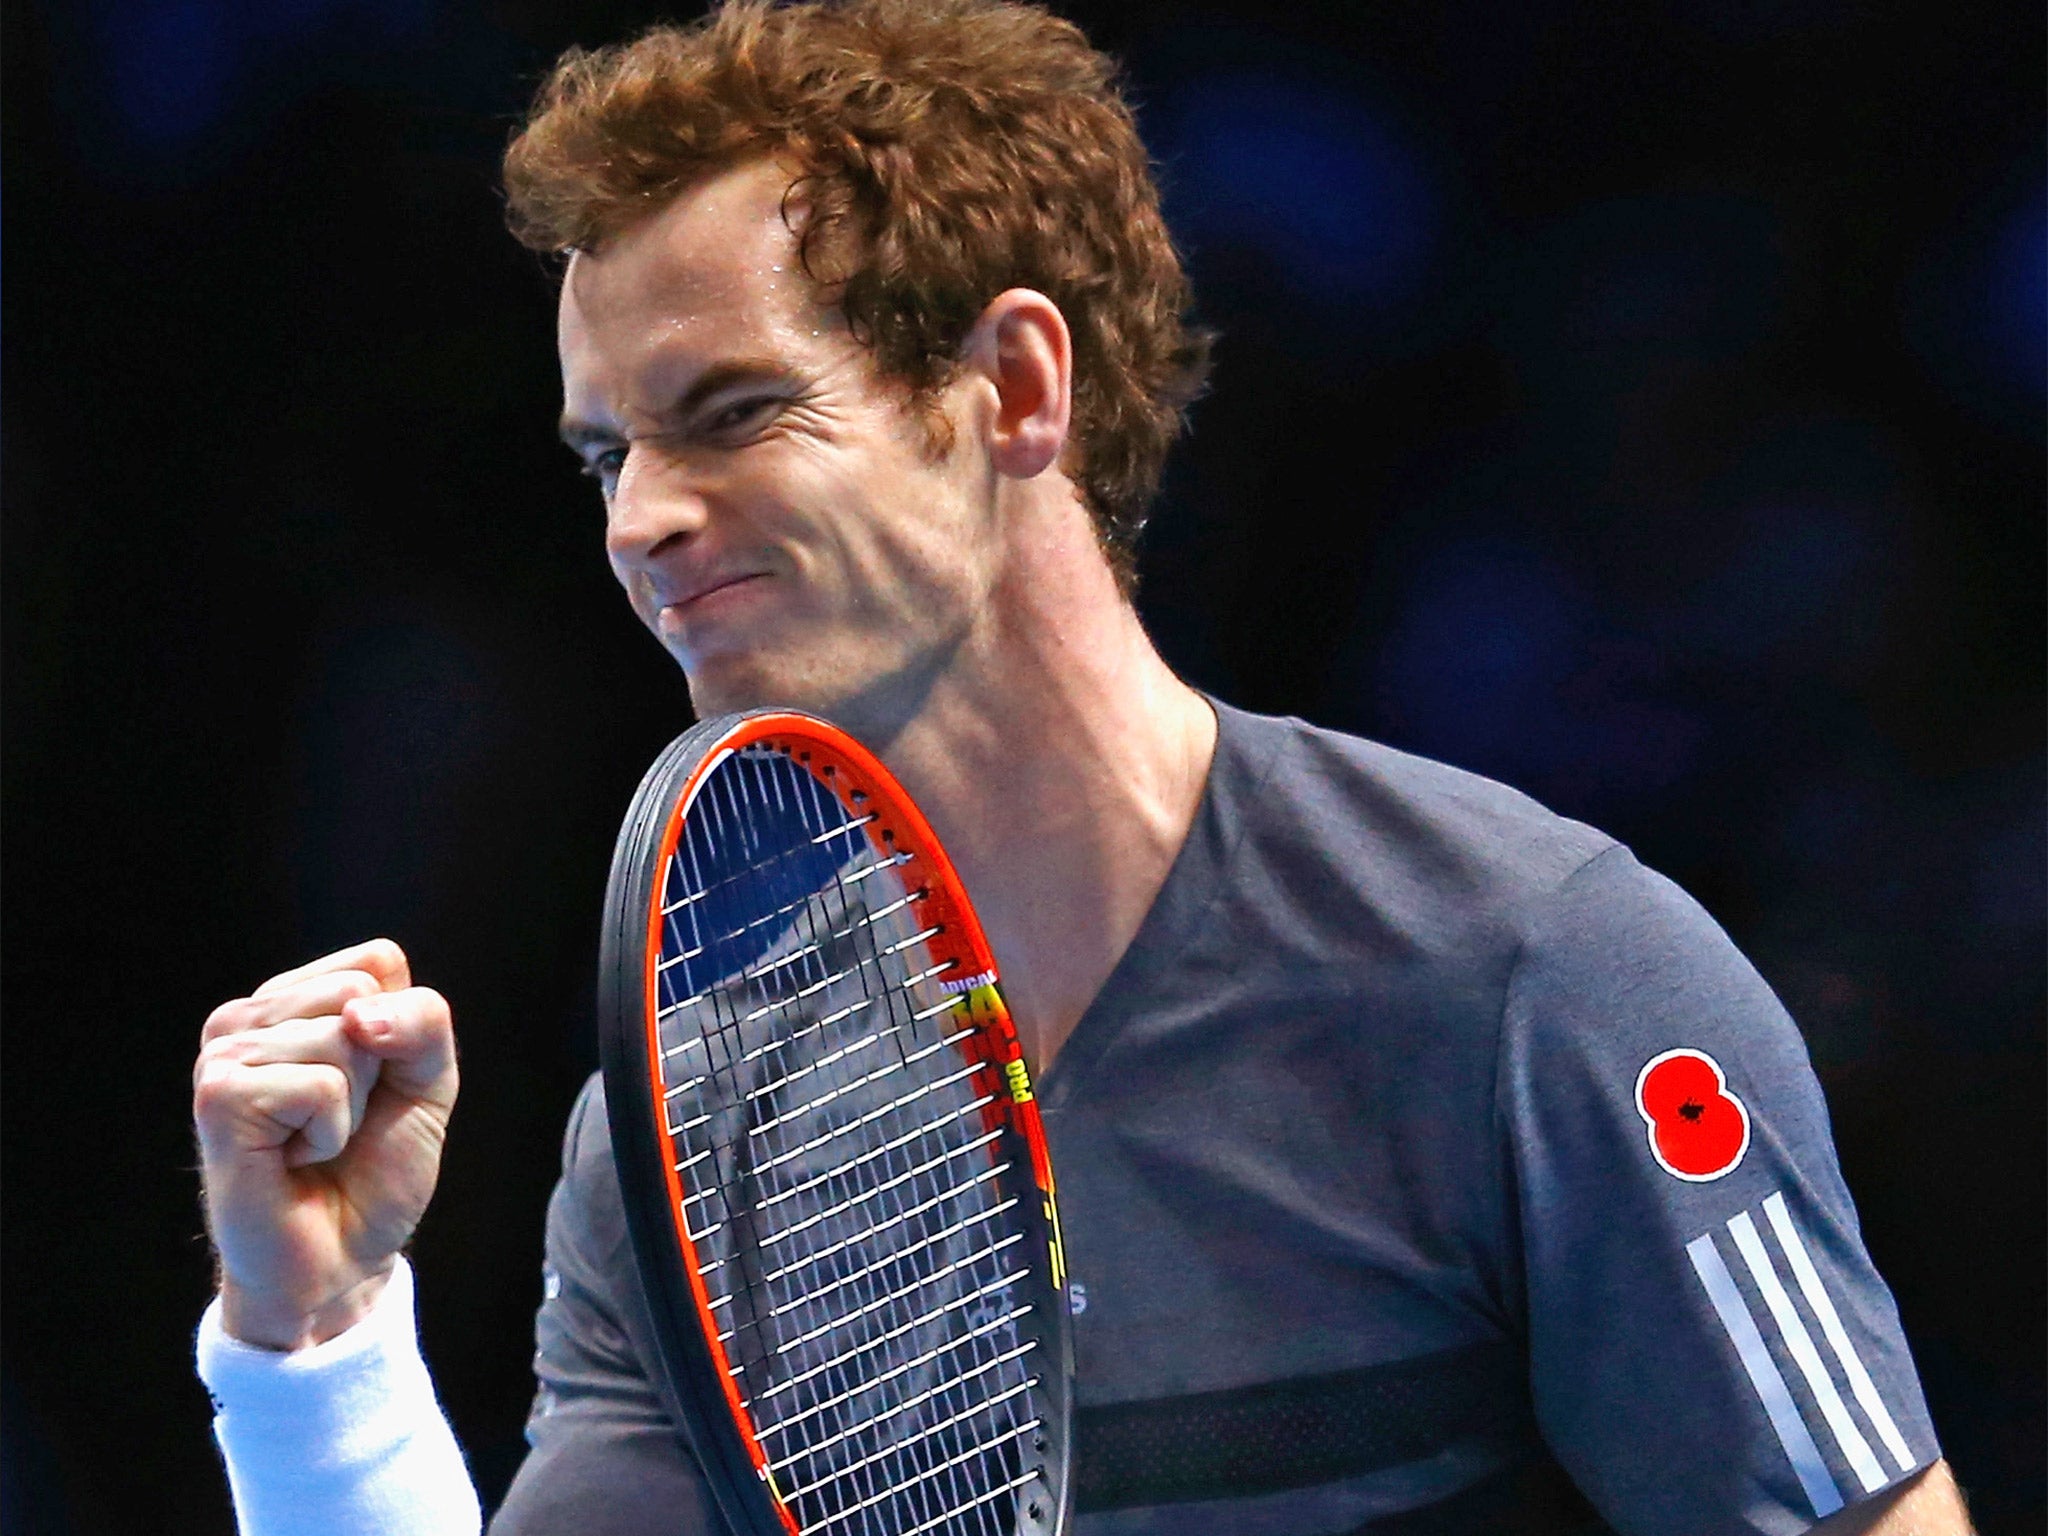 With the win, Murray's hopes of winning the ATP World Tour Finals stay alive